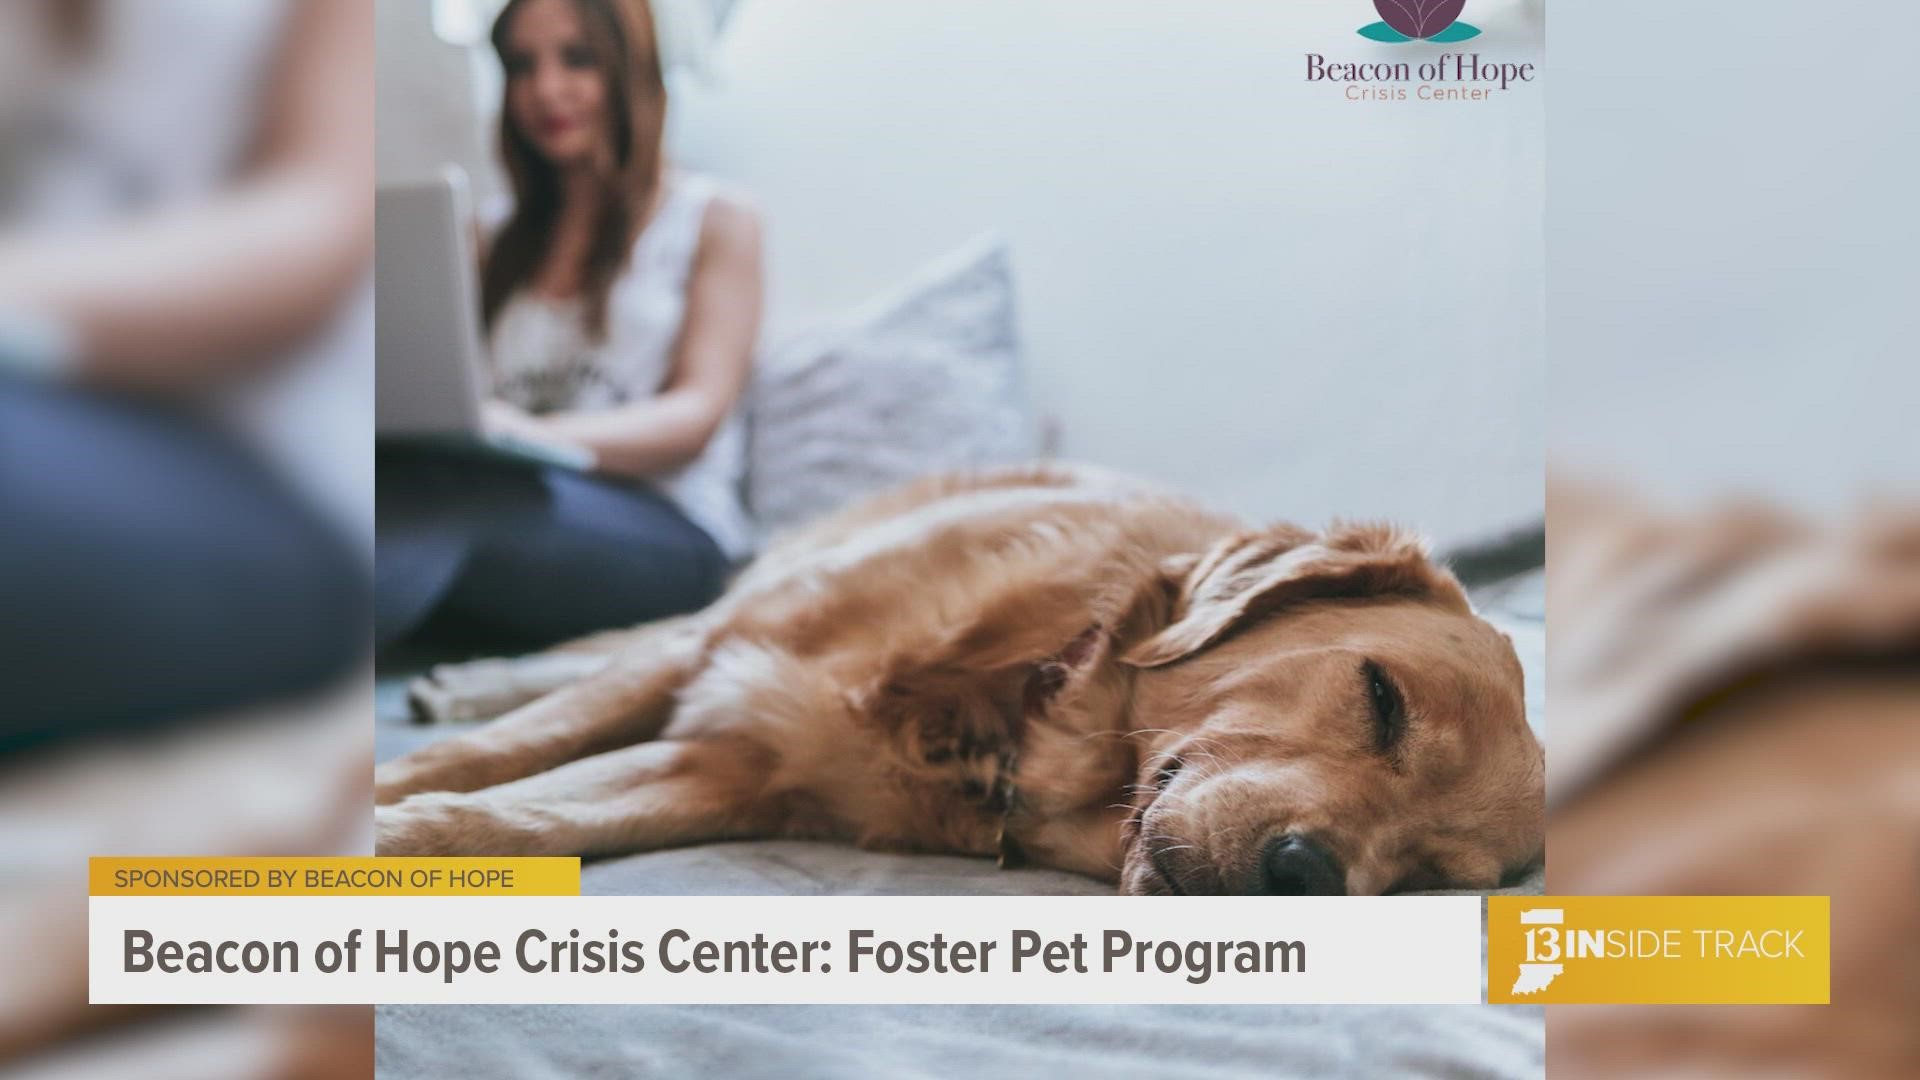 Abusers can use pets to keep victims trapped. A pet foster program from Beacon of Hope can help victims of domestic violence escape.